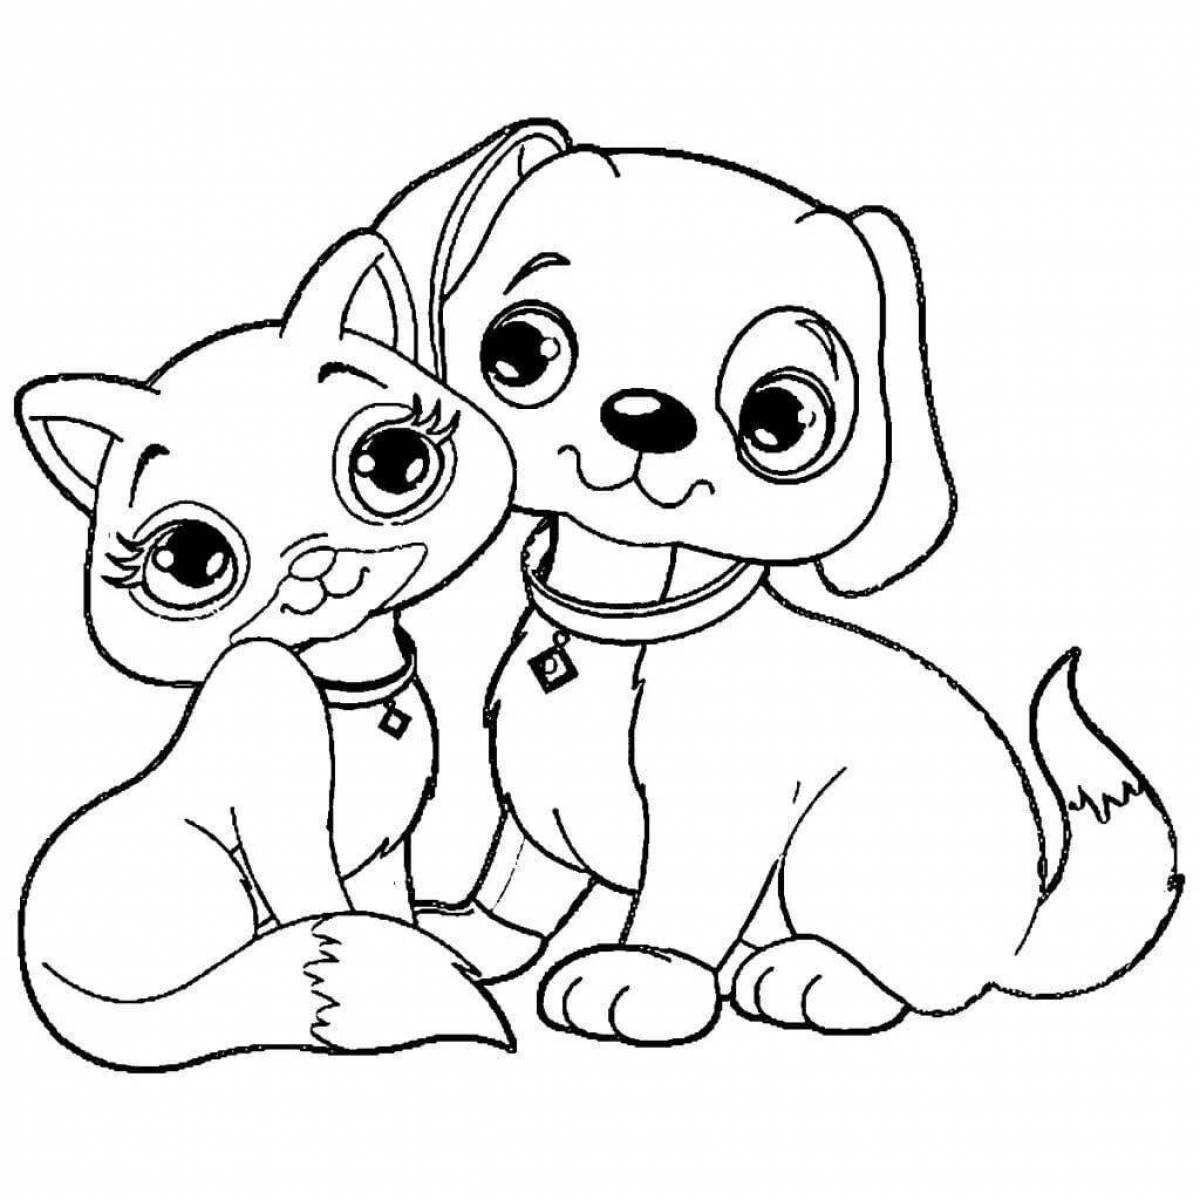 Loving dog coloring pages for boys